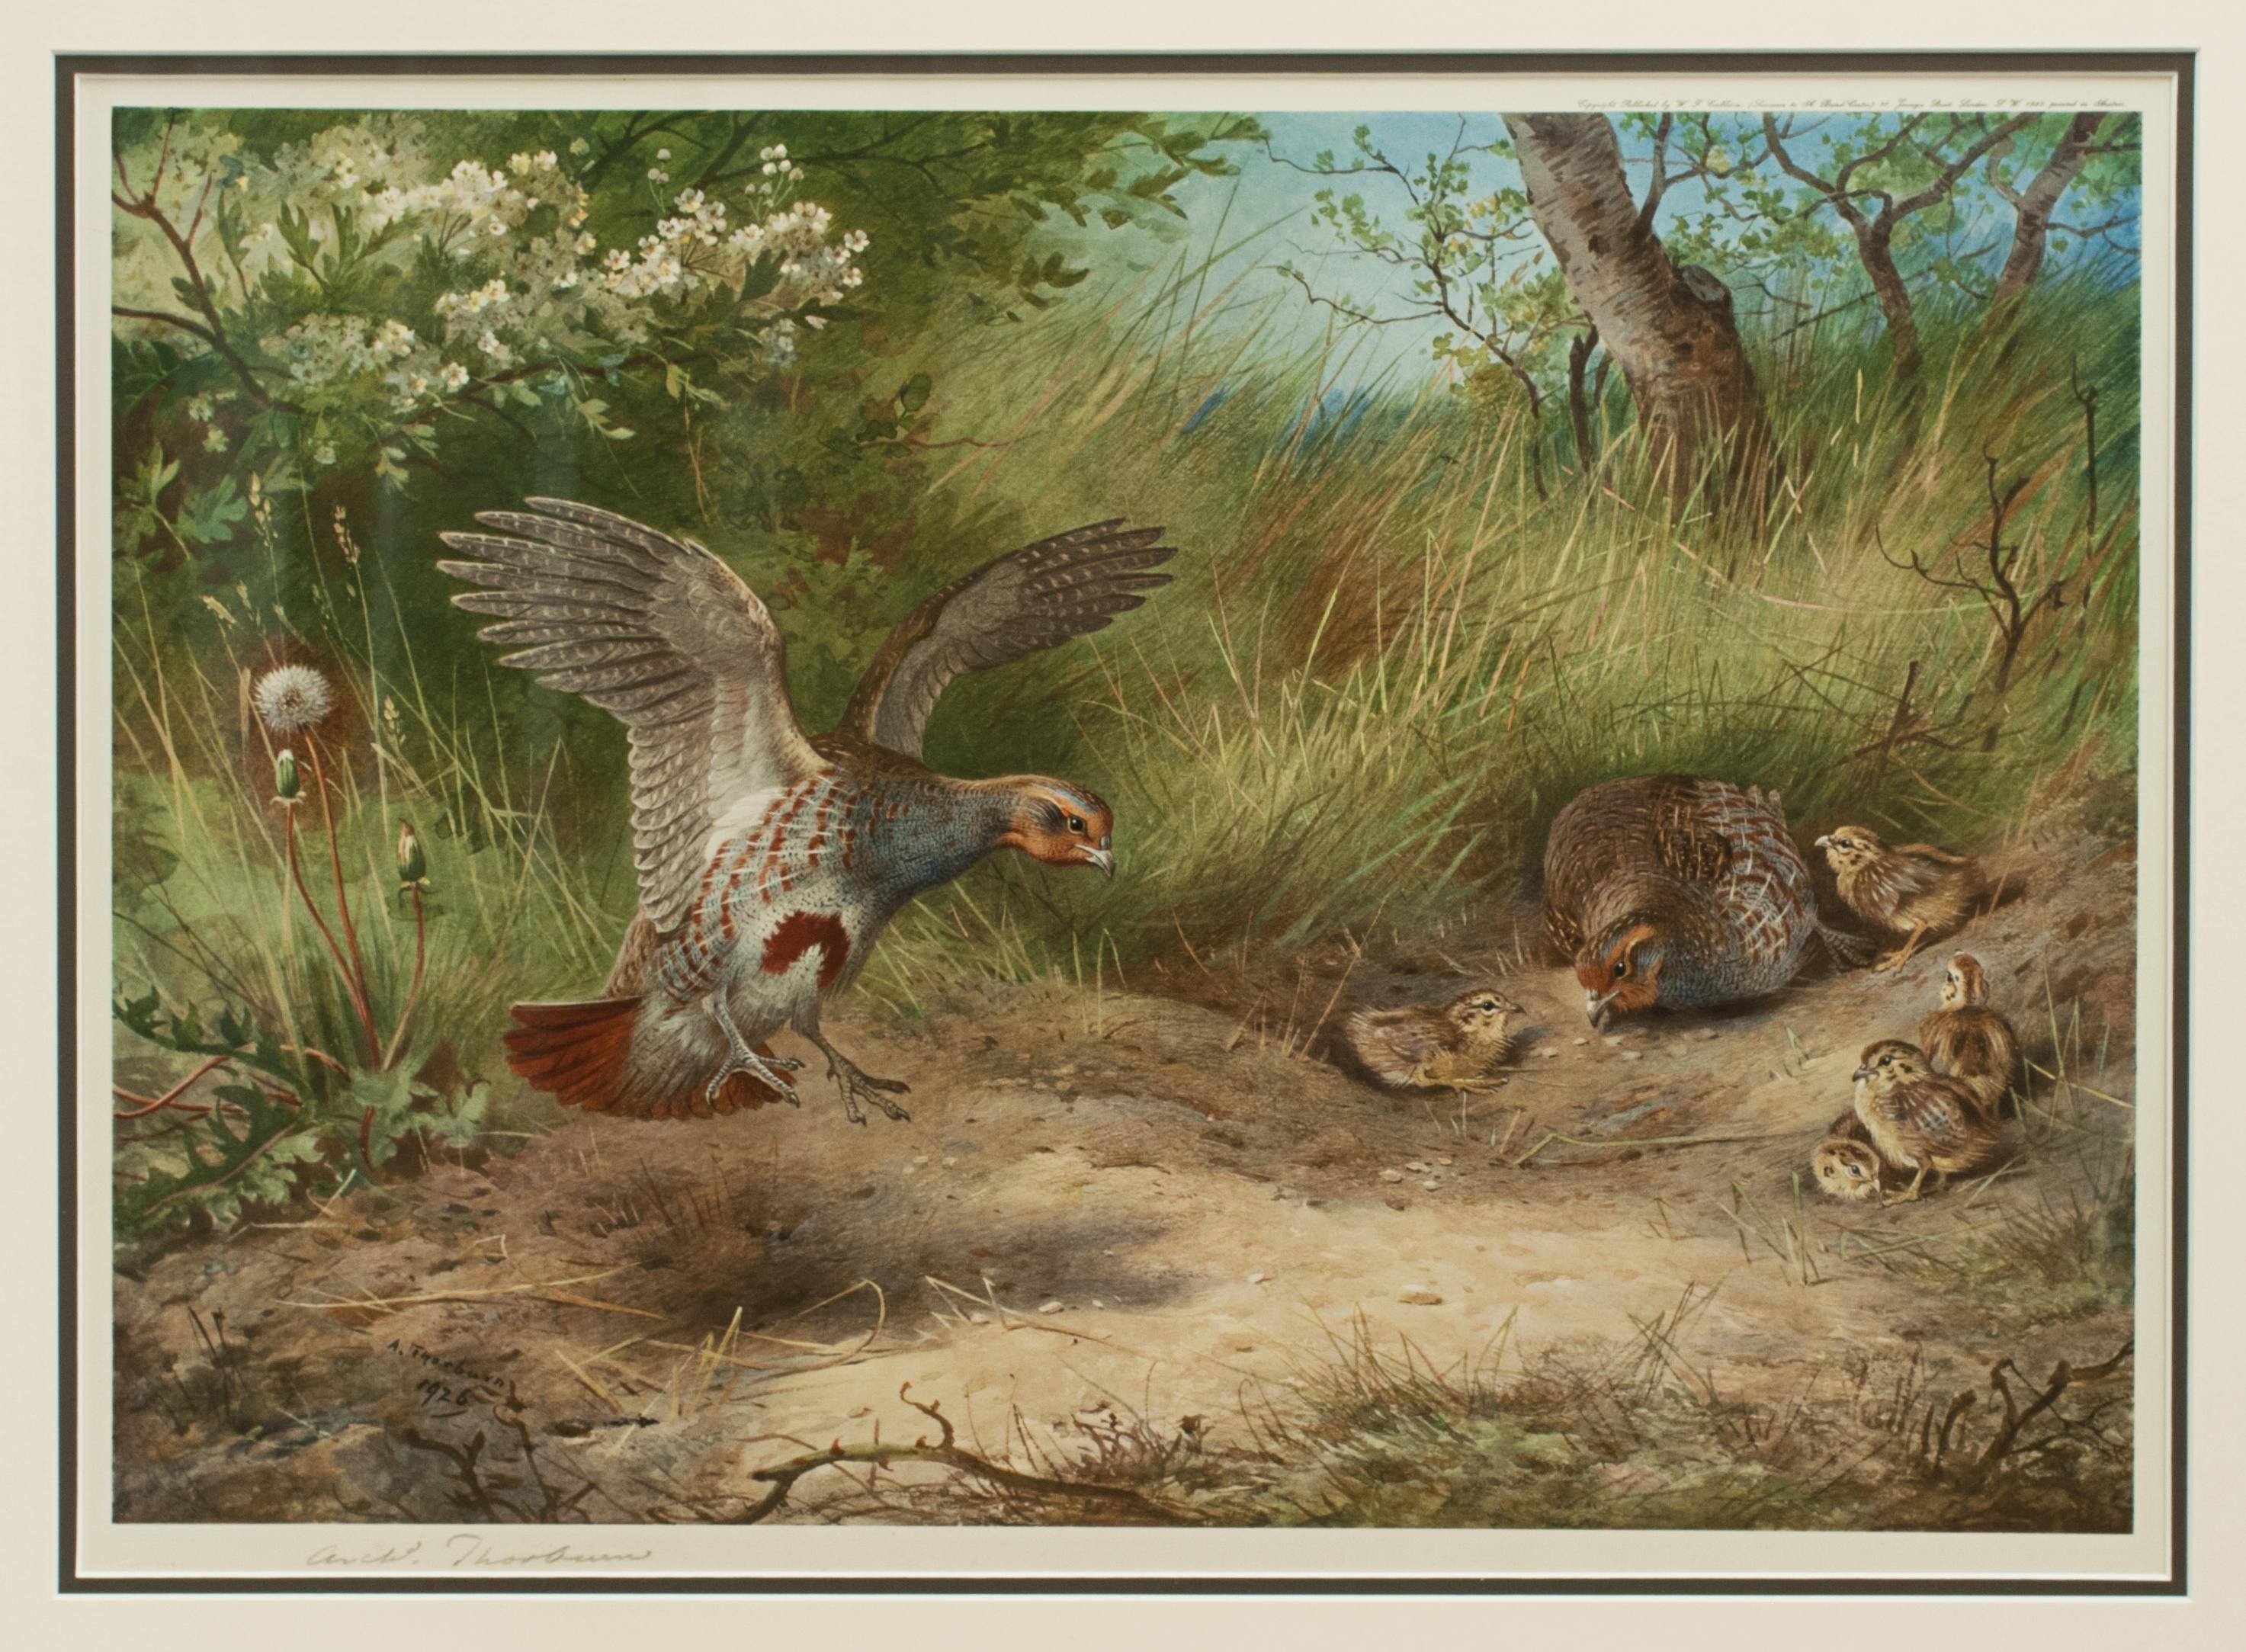 Early 20th Century Vintage Game Bird Prints, Colotypes by Archibald Thorburn 'The Seasons'